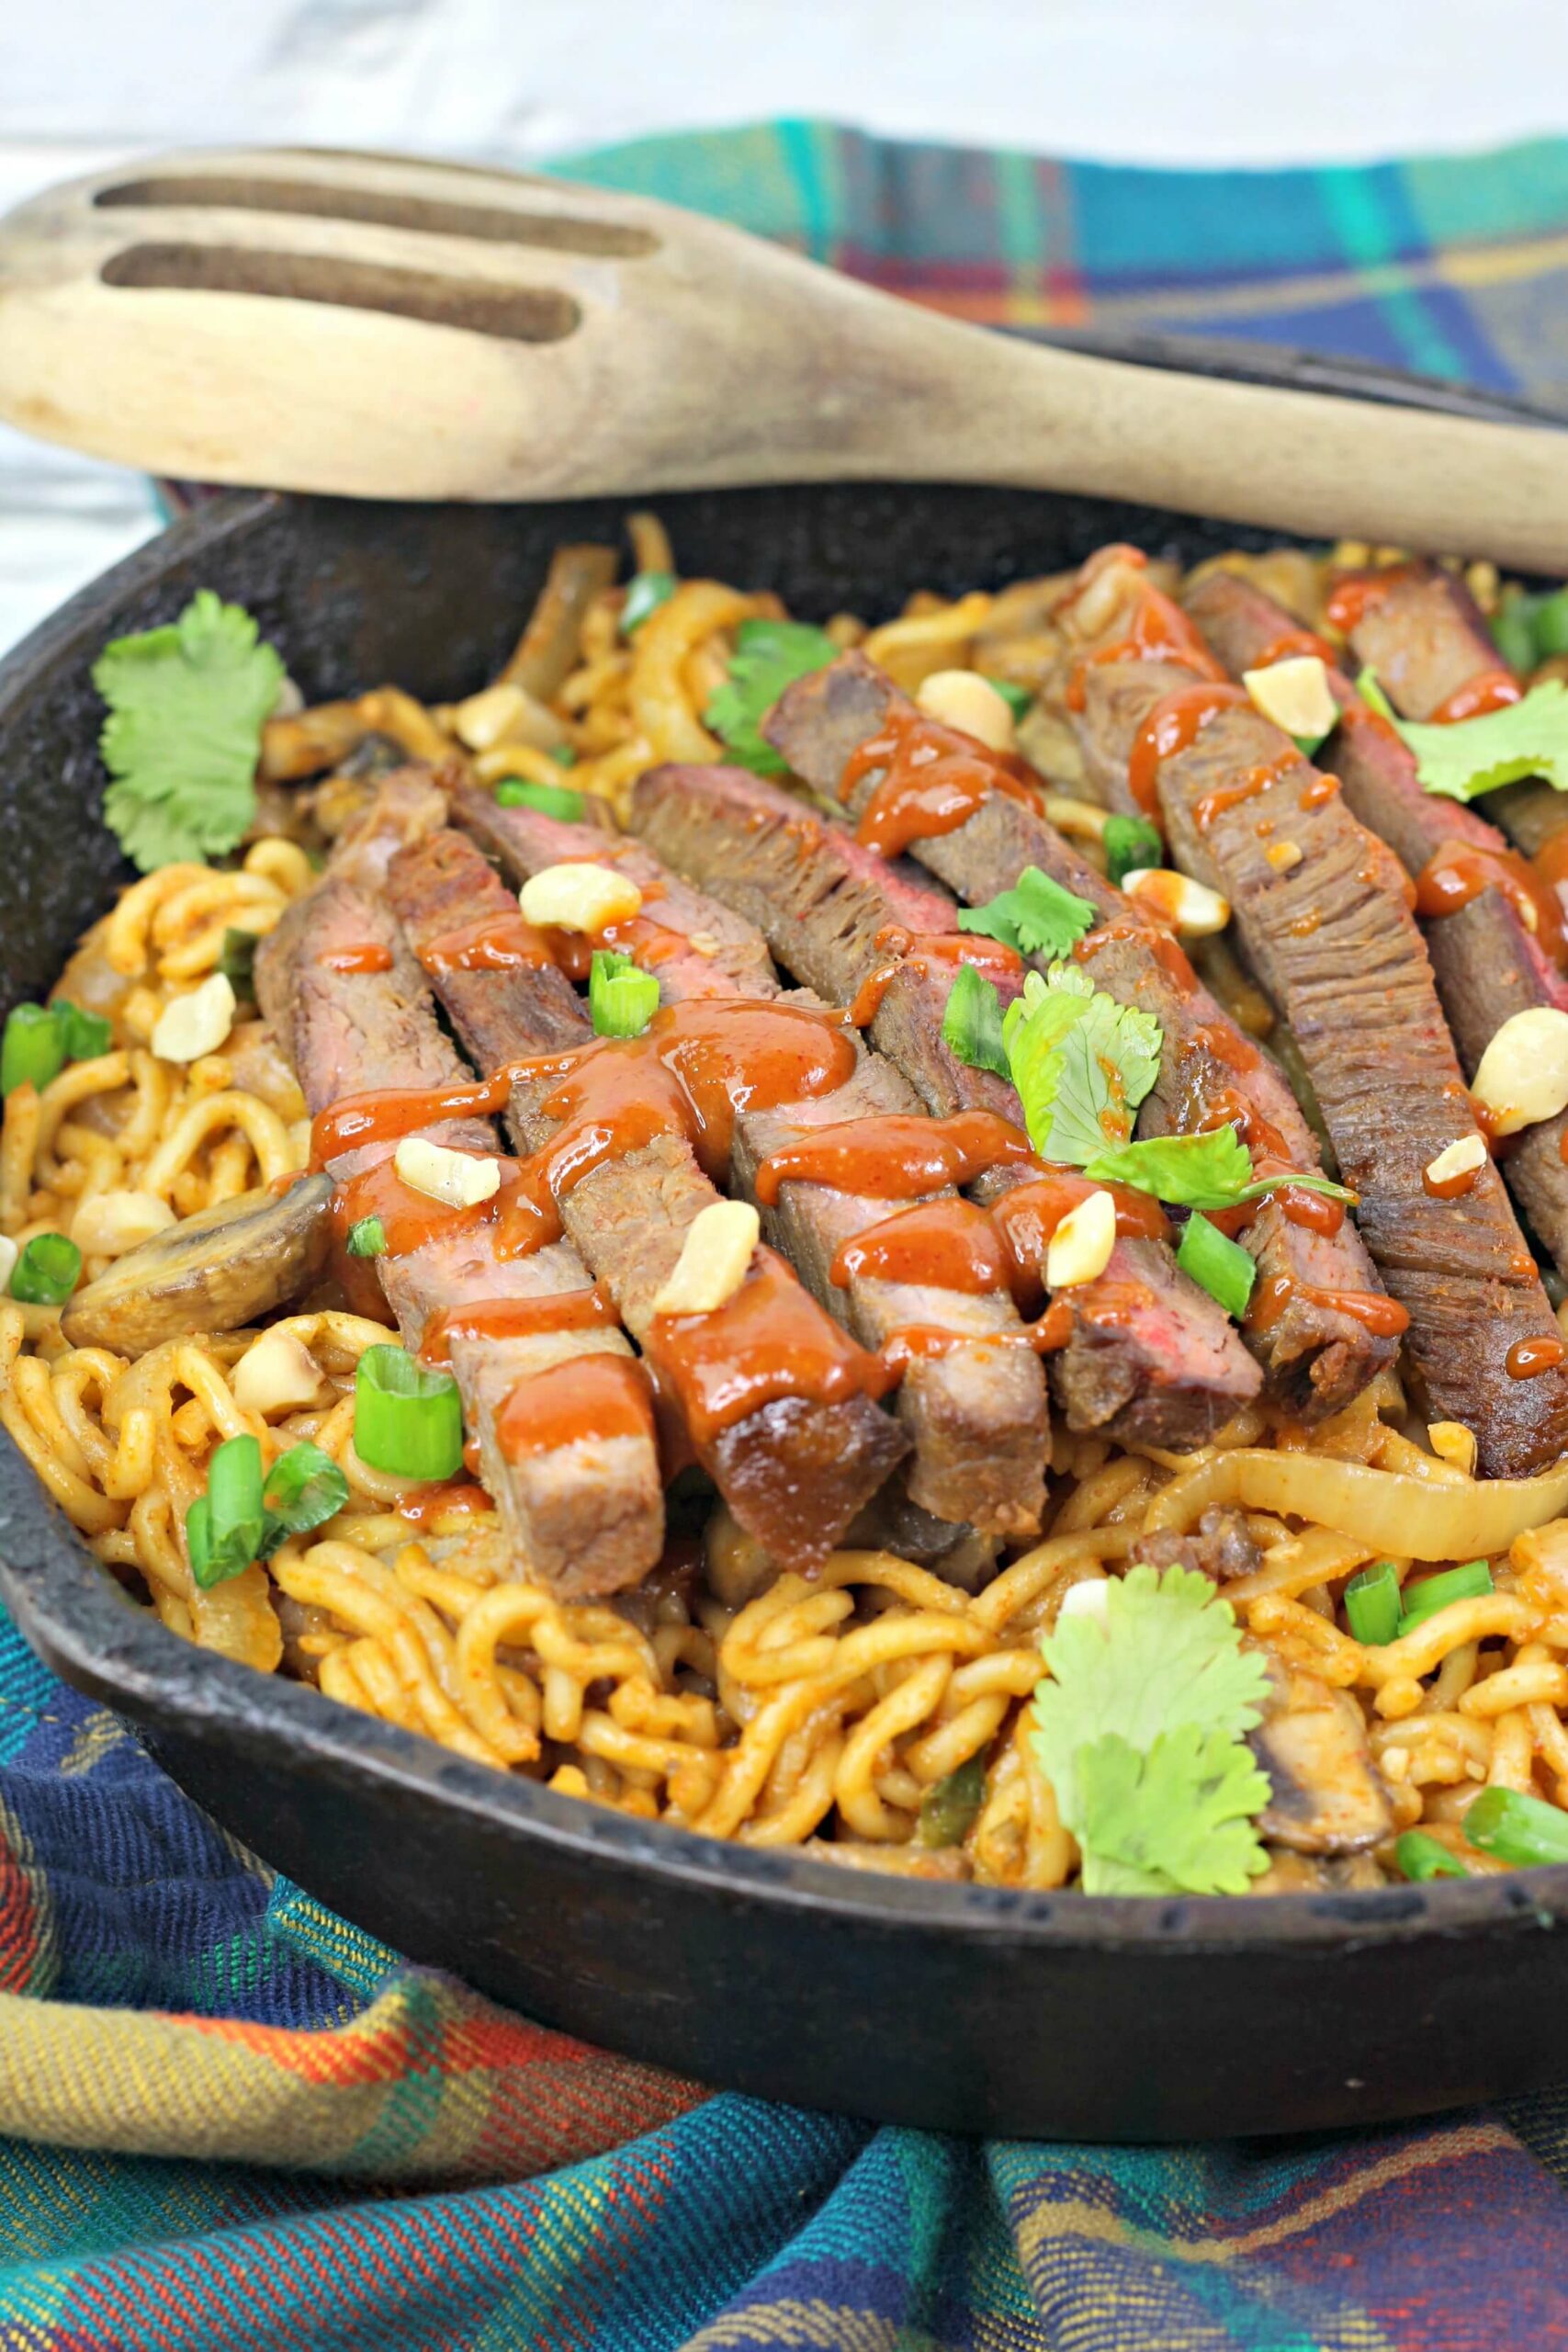 A pan of the korean spicy noodles with steak.